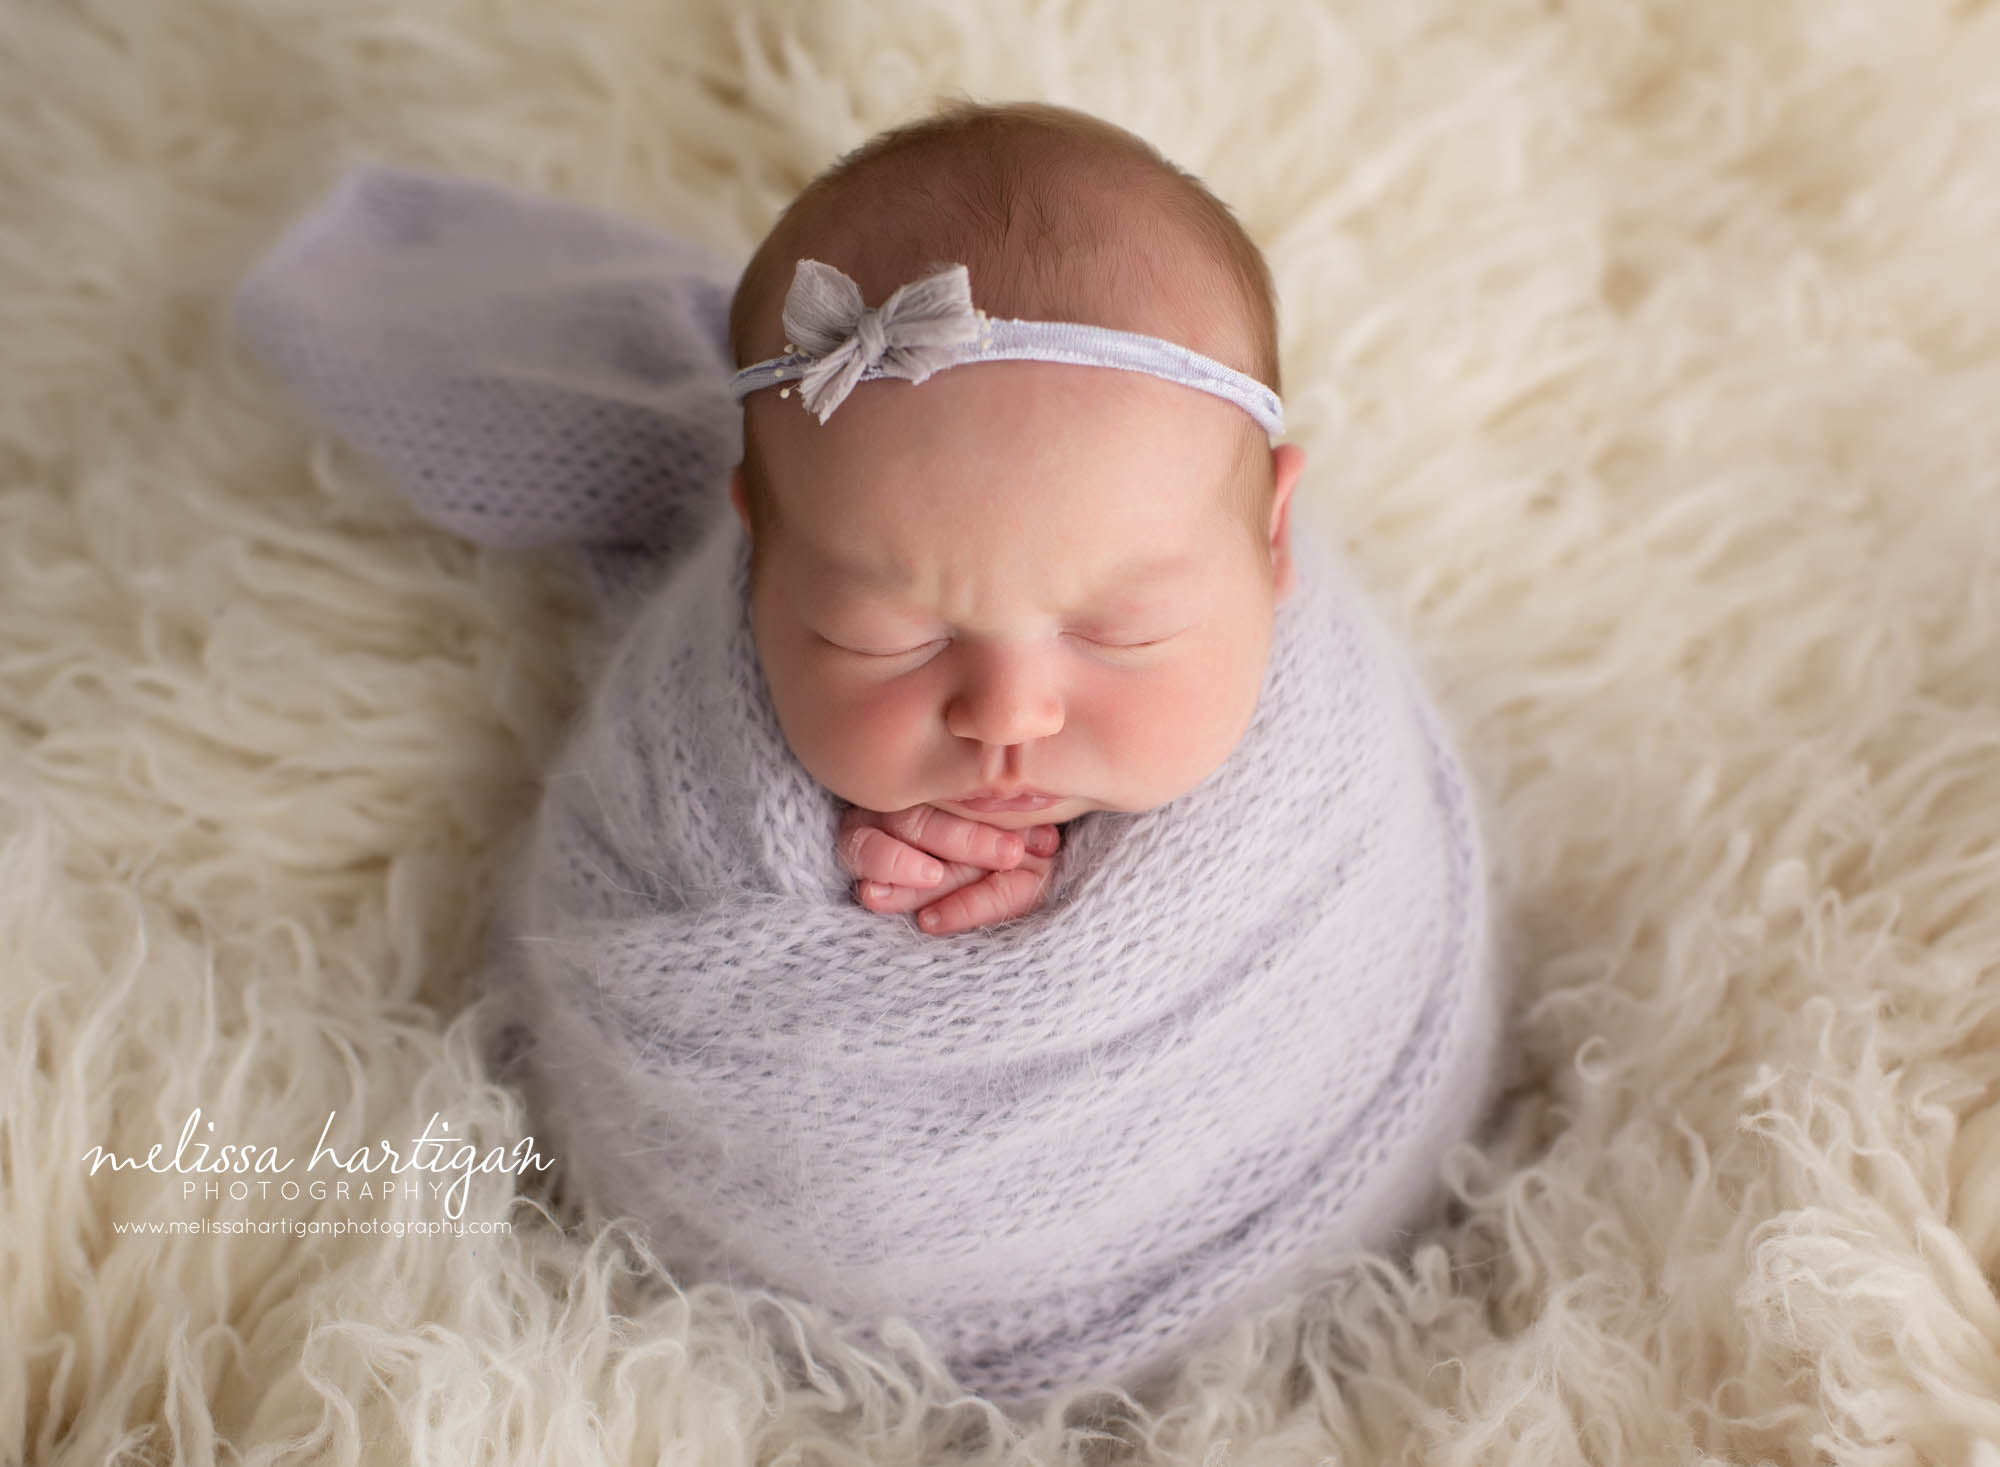 Baby girl wrapped in light purple knitted wrap with liliac colored headband